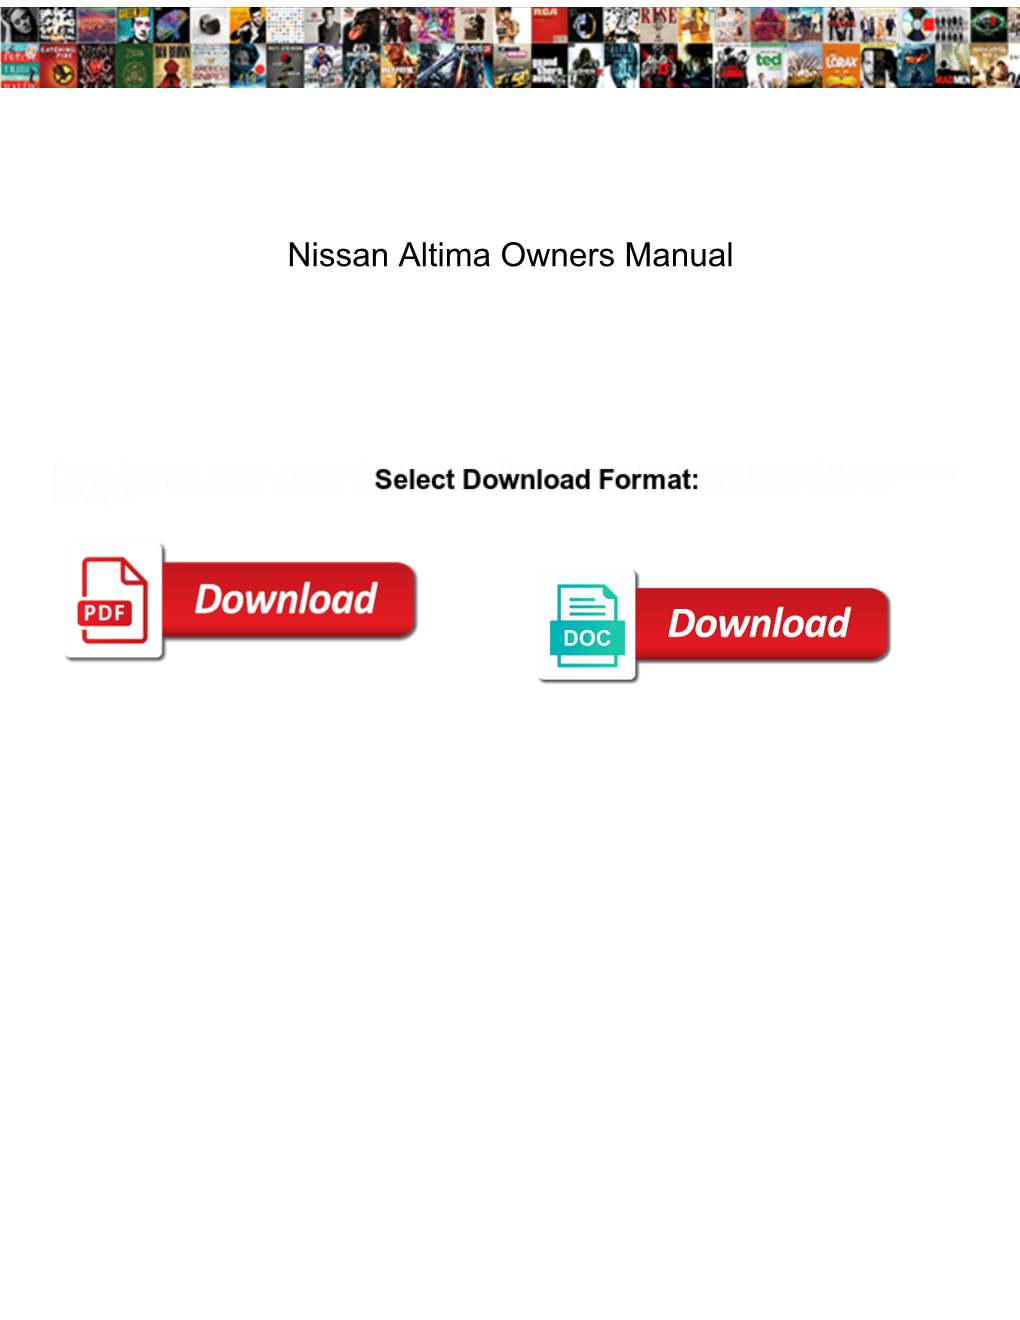 Nissan Altima Owners Manual